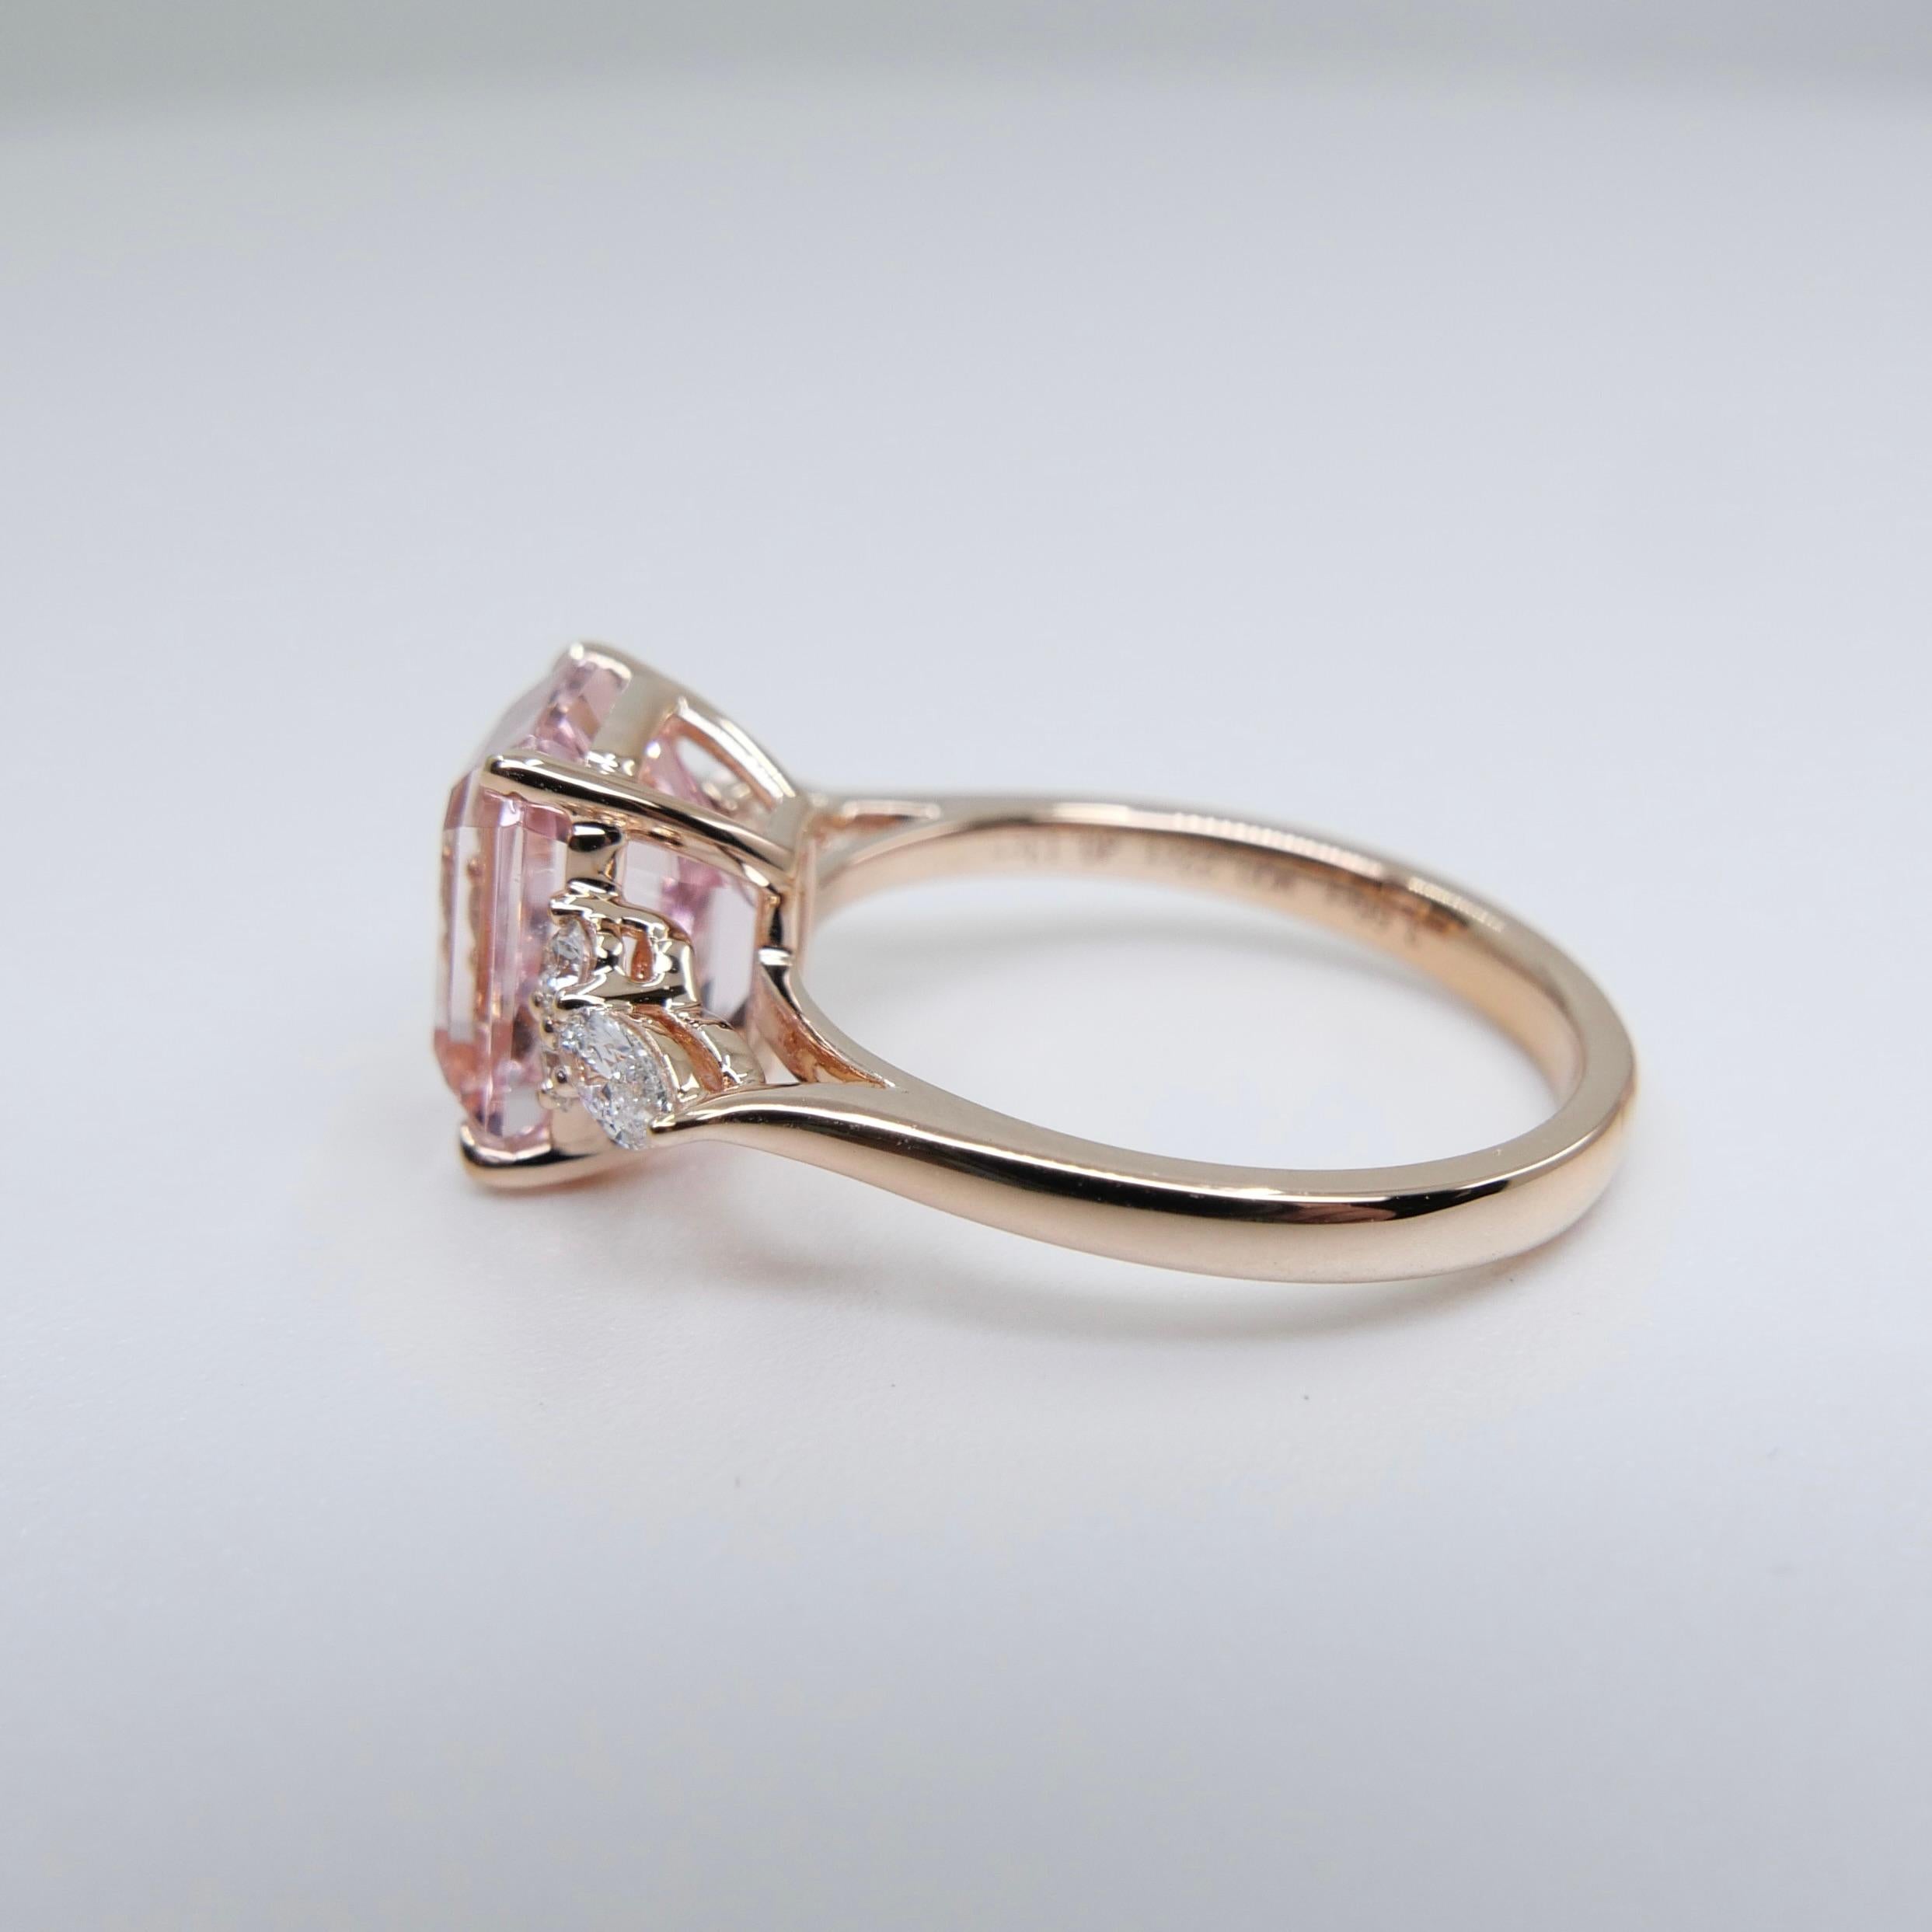 Emerald Cut 3.66 Cts Peach Pink Morganite & Diamond Cocktail Ring. Stunning!  For Sale